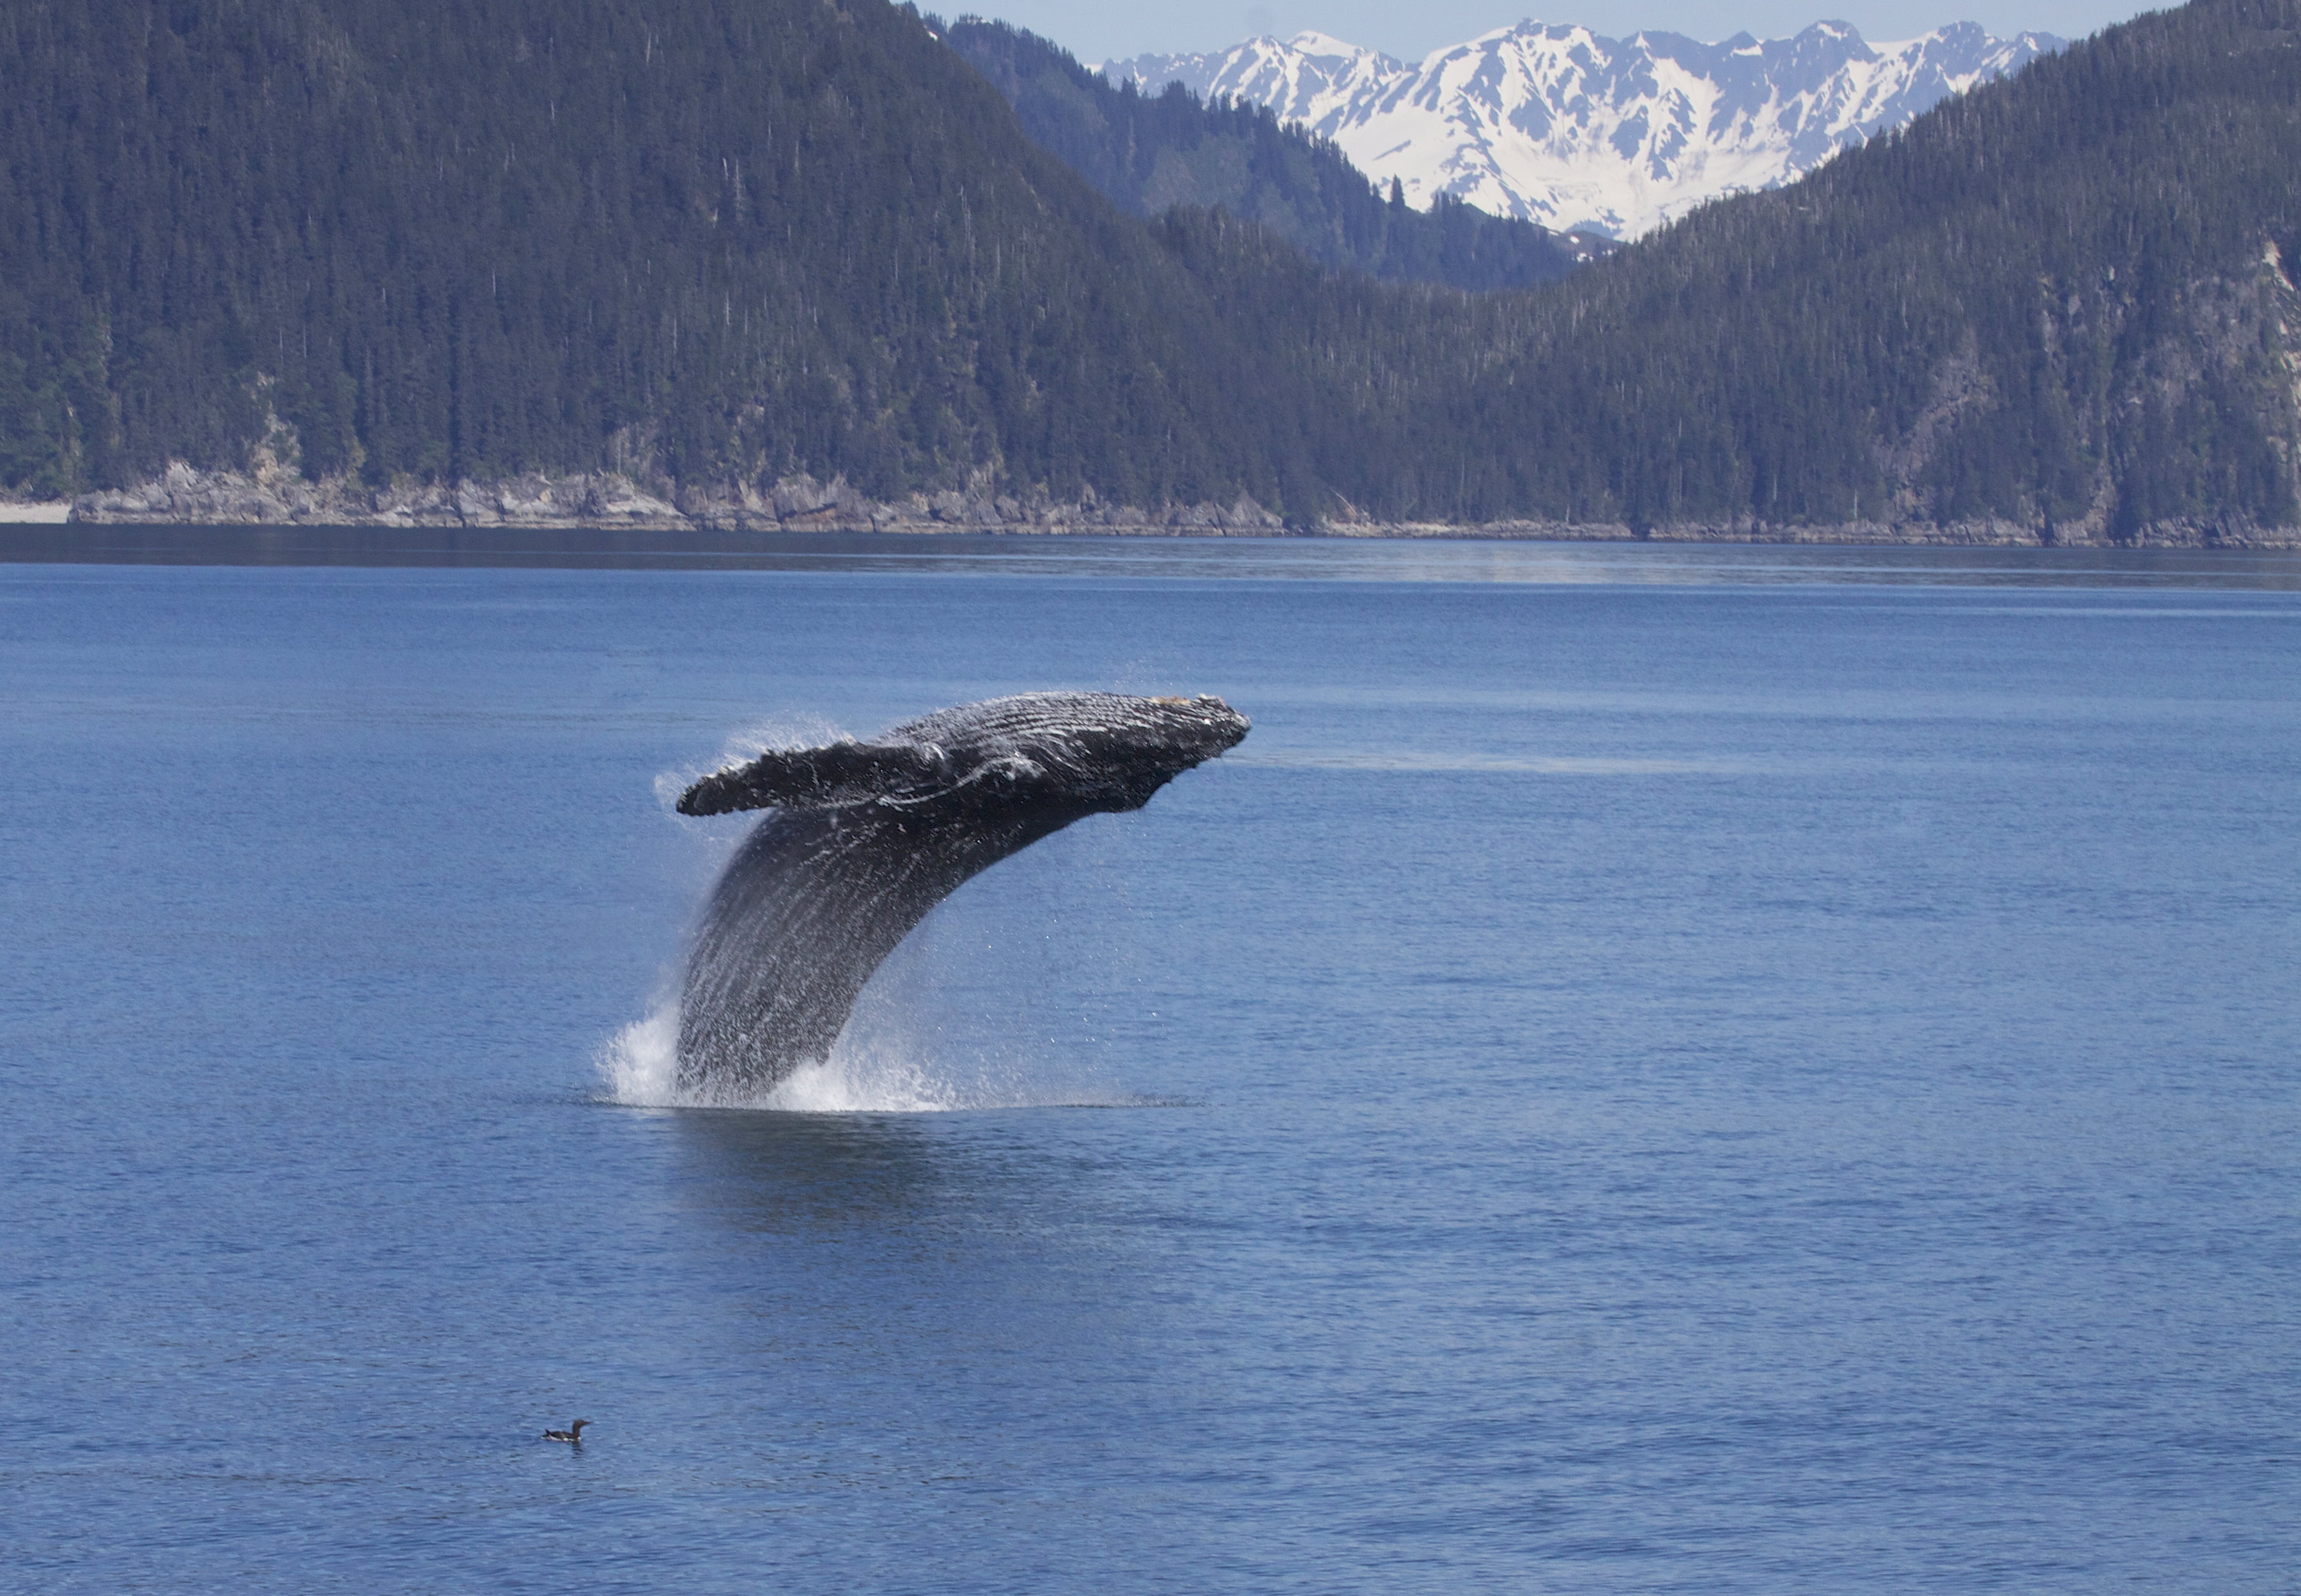 Whale jumping from ocean, humpback, megaptera novaeangliae, humpback, whale, megaptera novaeangliae